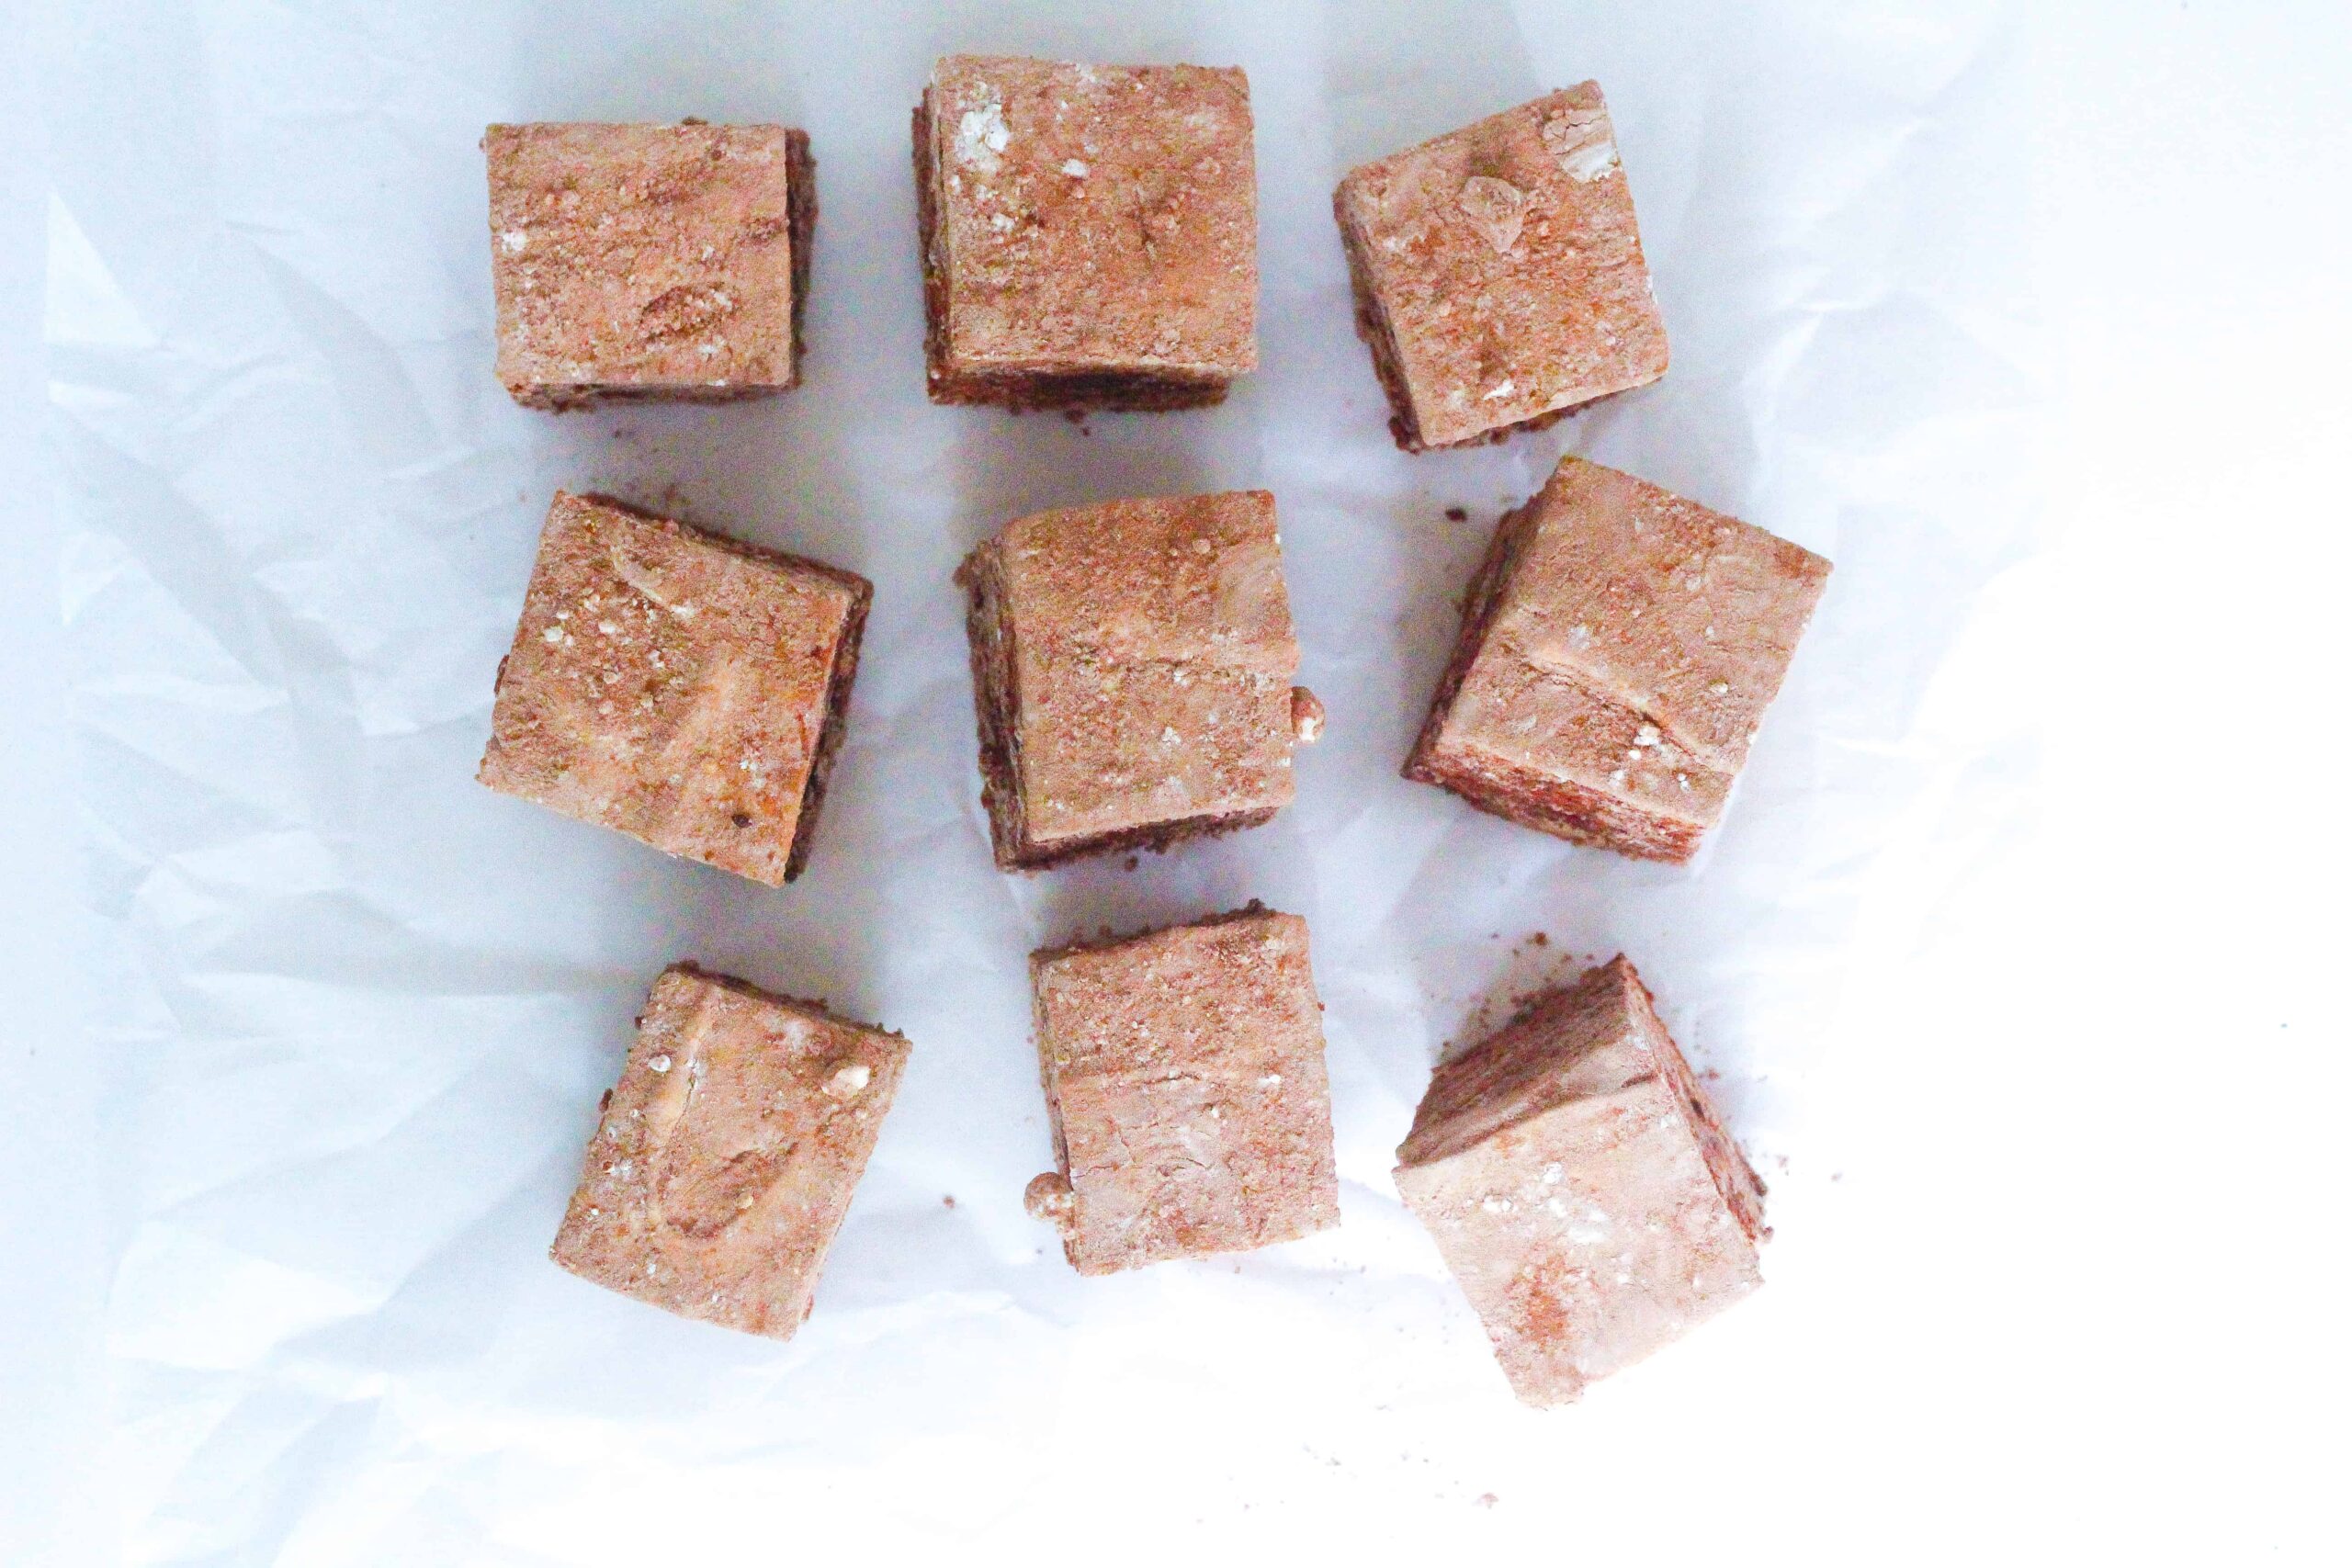 top down view of a three by three grid of coffee marshmallows, some of which are off kilter